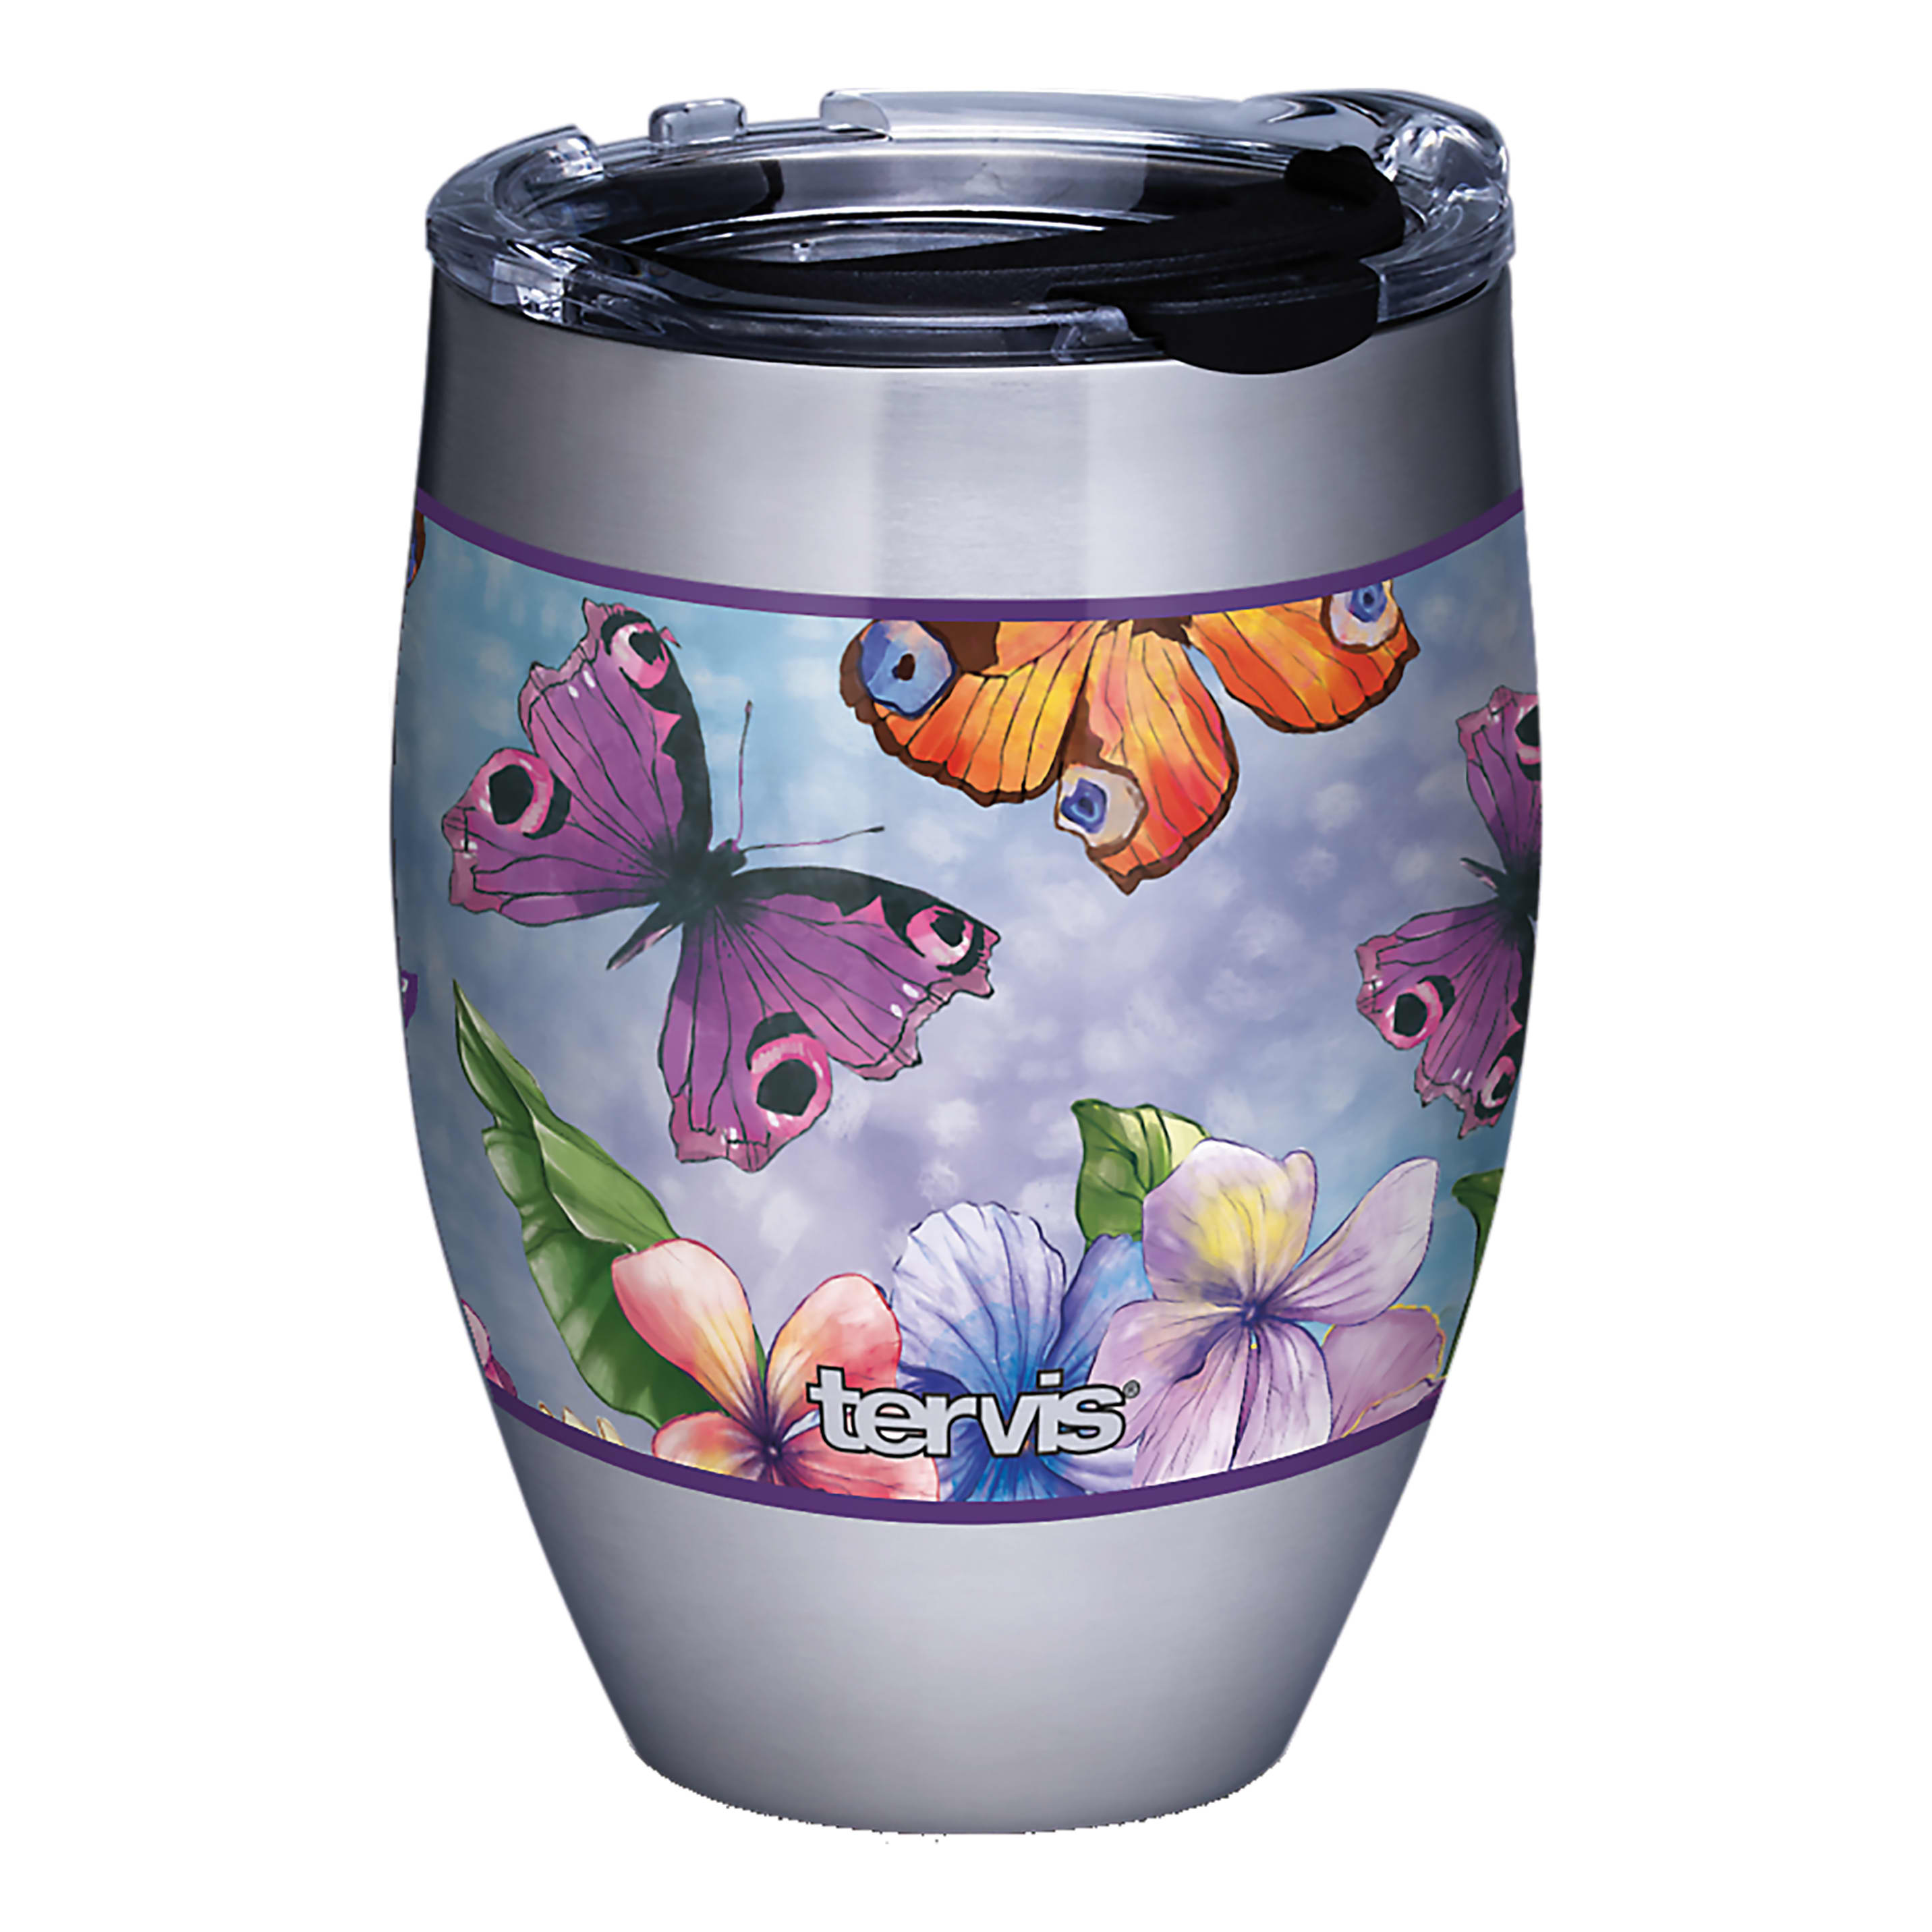 Tervis 12 oz. Stainless Steel Tumblers - Butterfly Garden